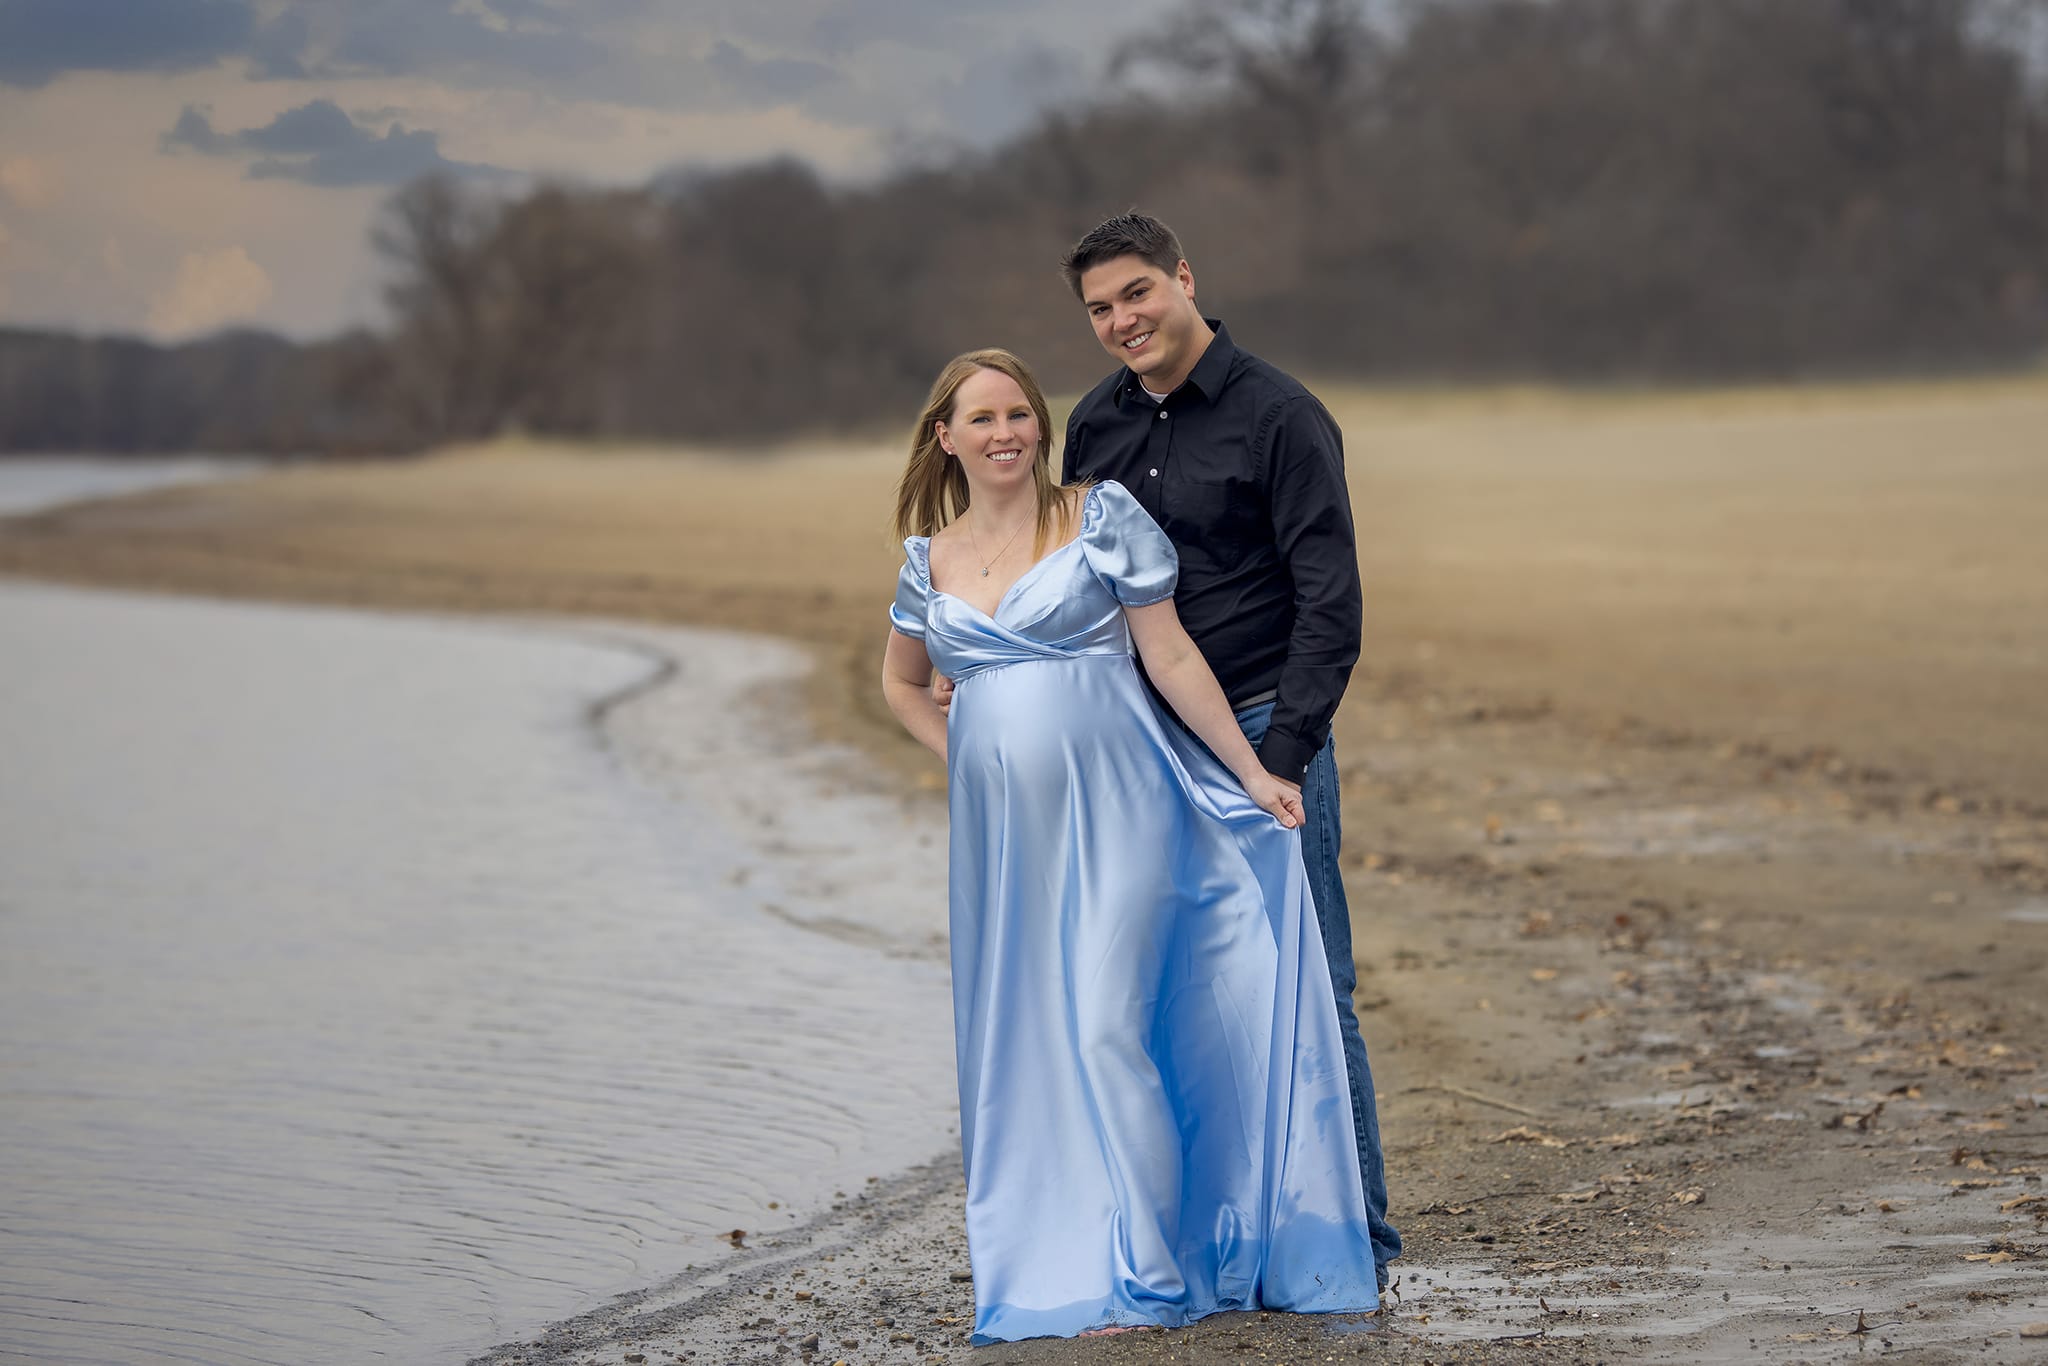 A pregnant woman stands in front of her partner as her partner holds her from behind on a Michigan beach for a maternity photoshoot; a moment captured by a skilled maternity photographer.